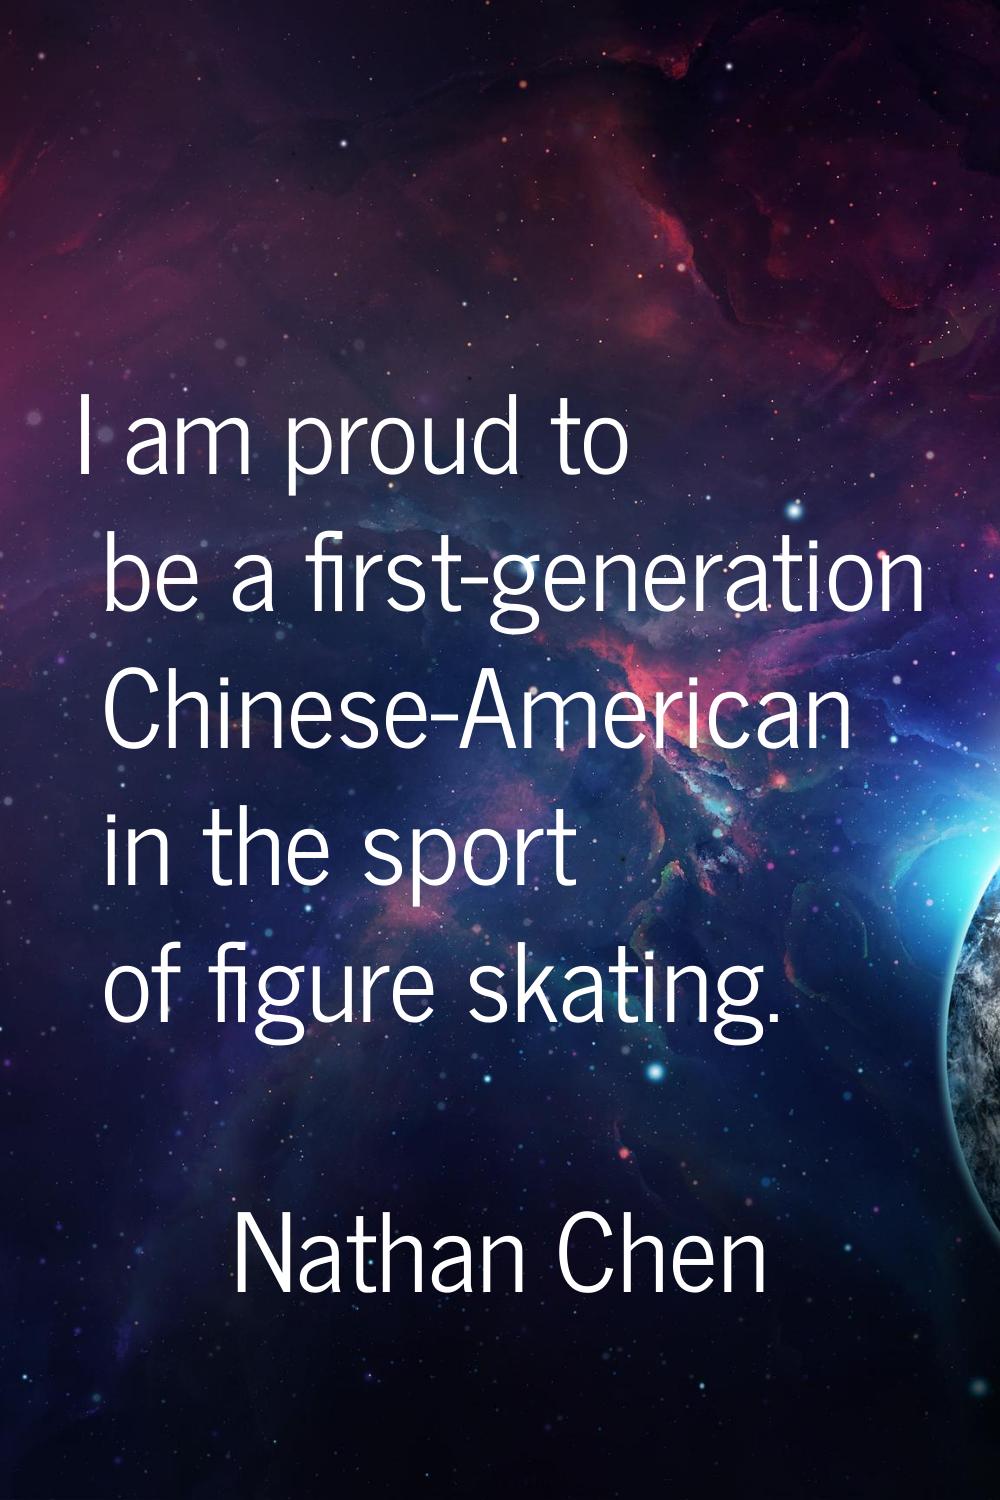 I am proud to be a first-generation Chinese-American in the sport of figure skating.